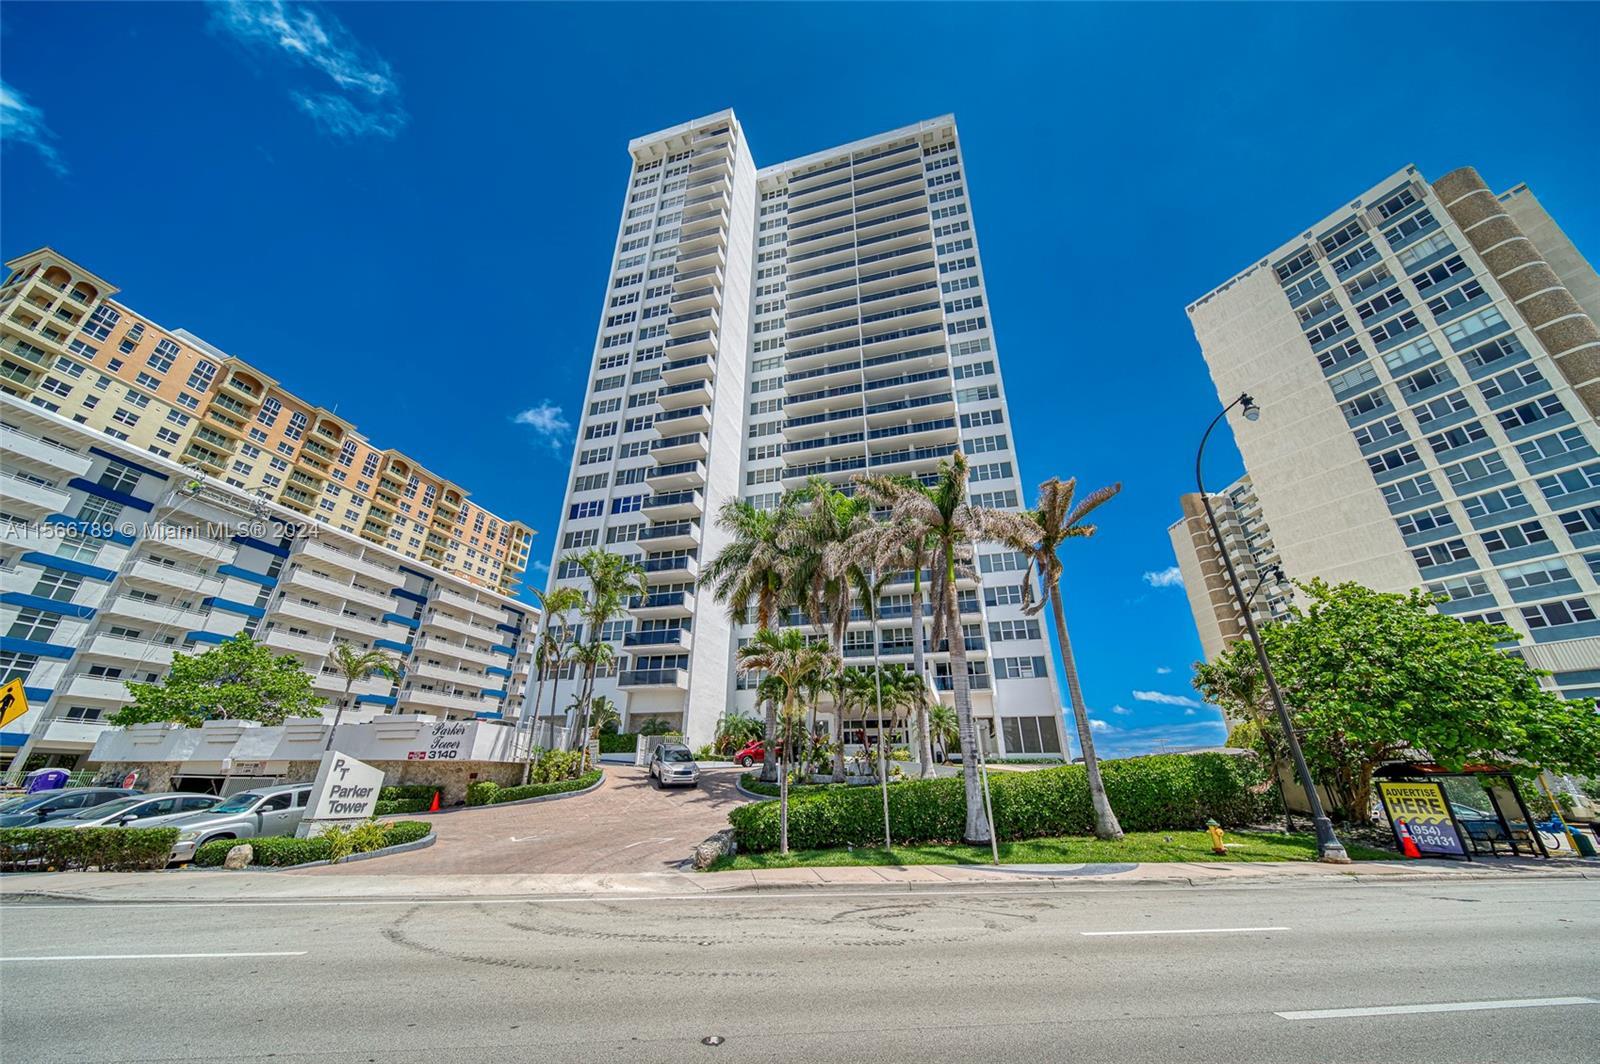 DON'T MISS OUT ON THIS BEAUTIFUL 1BED 1.5 BATH OCEAN FRONT CONDO LOCATED IN THE BOUTIQUE PARKER TOWE